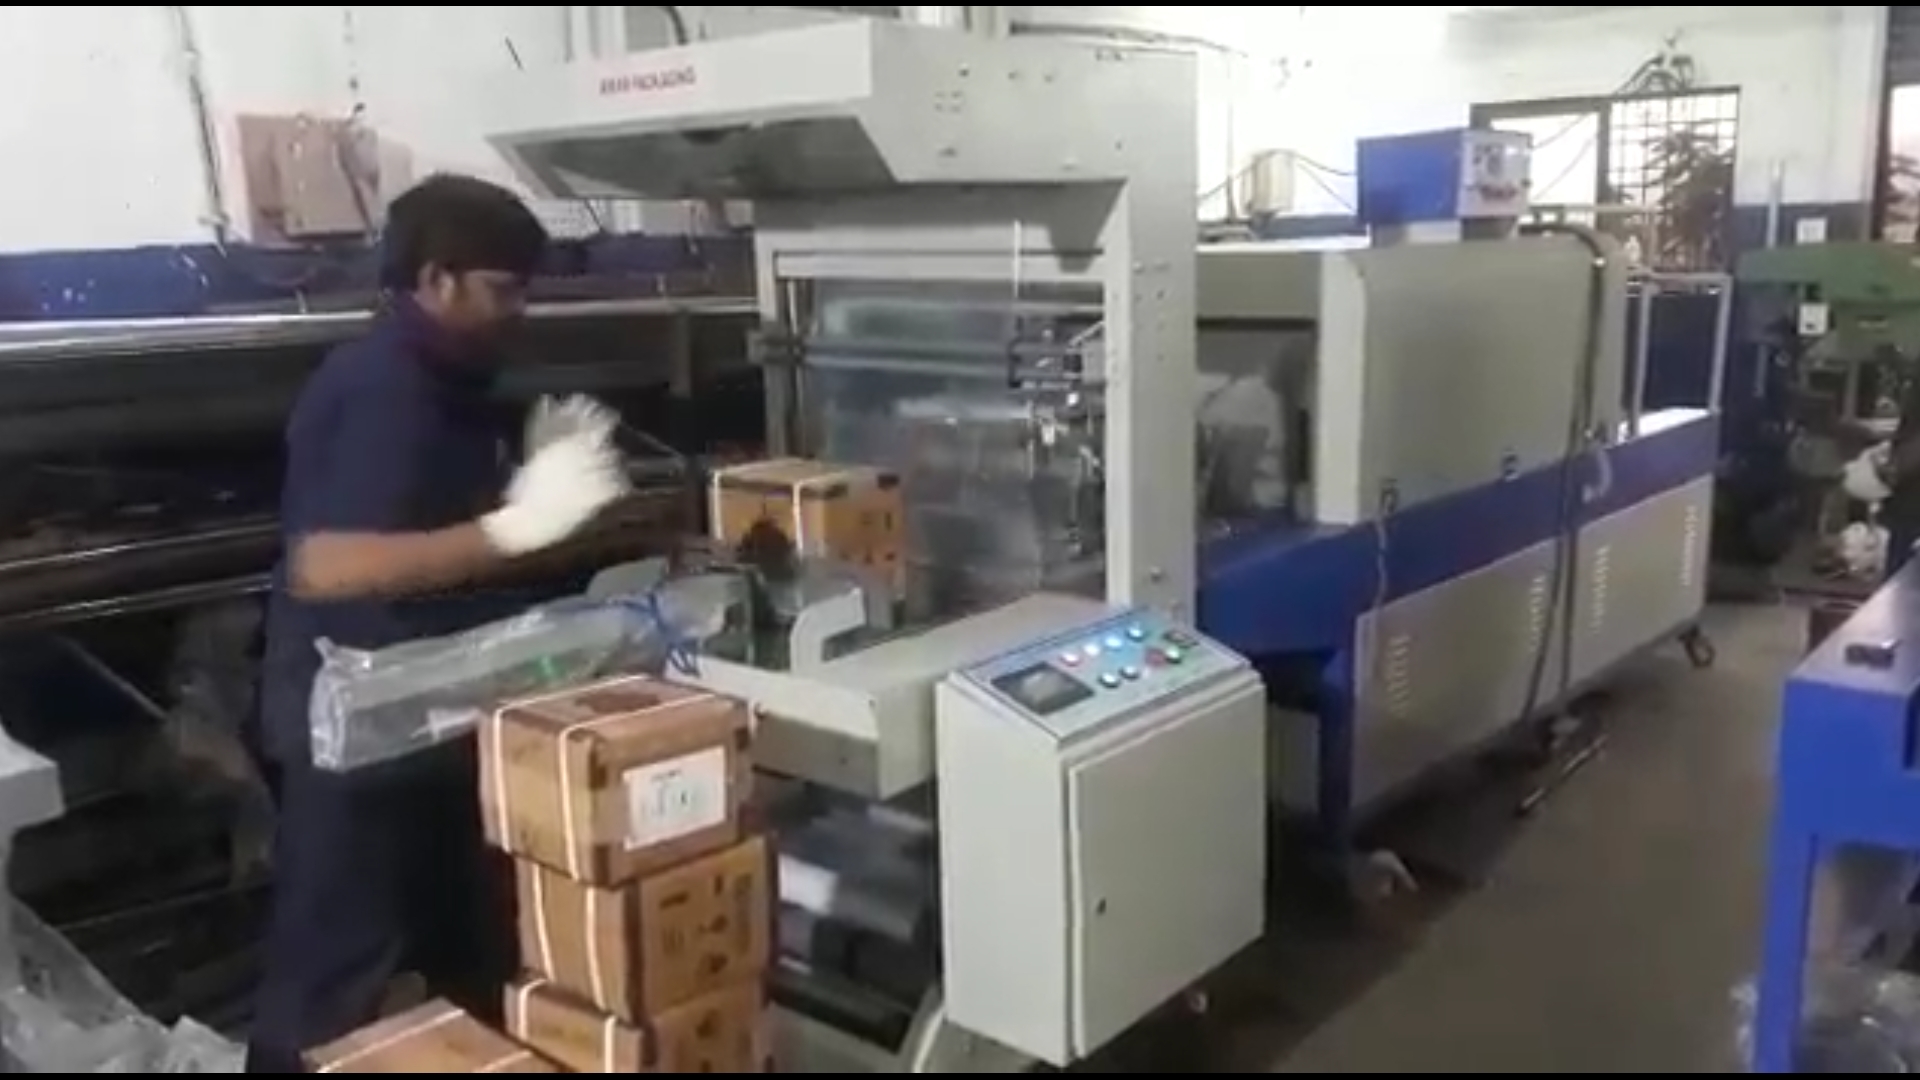 Fully Automatic Web Sealer with Shrink Wrapping Machine